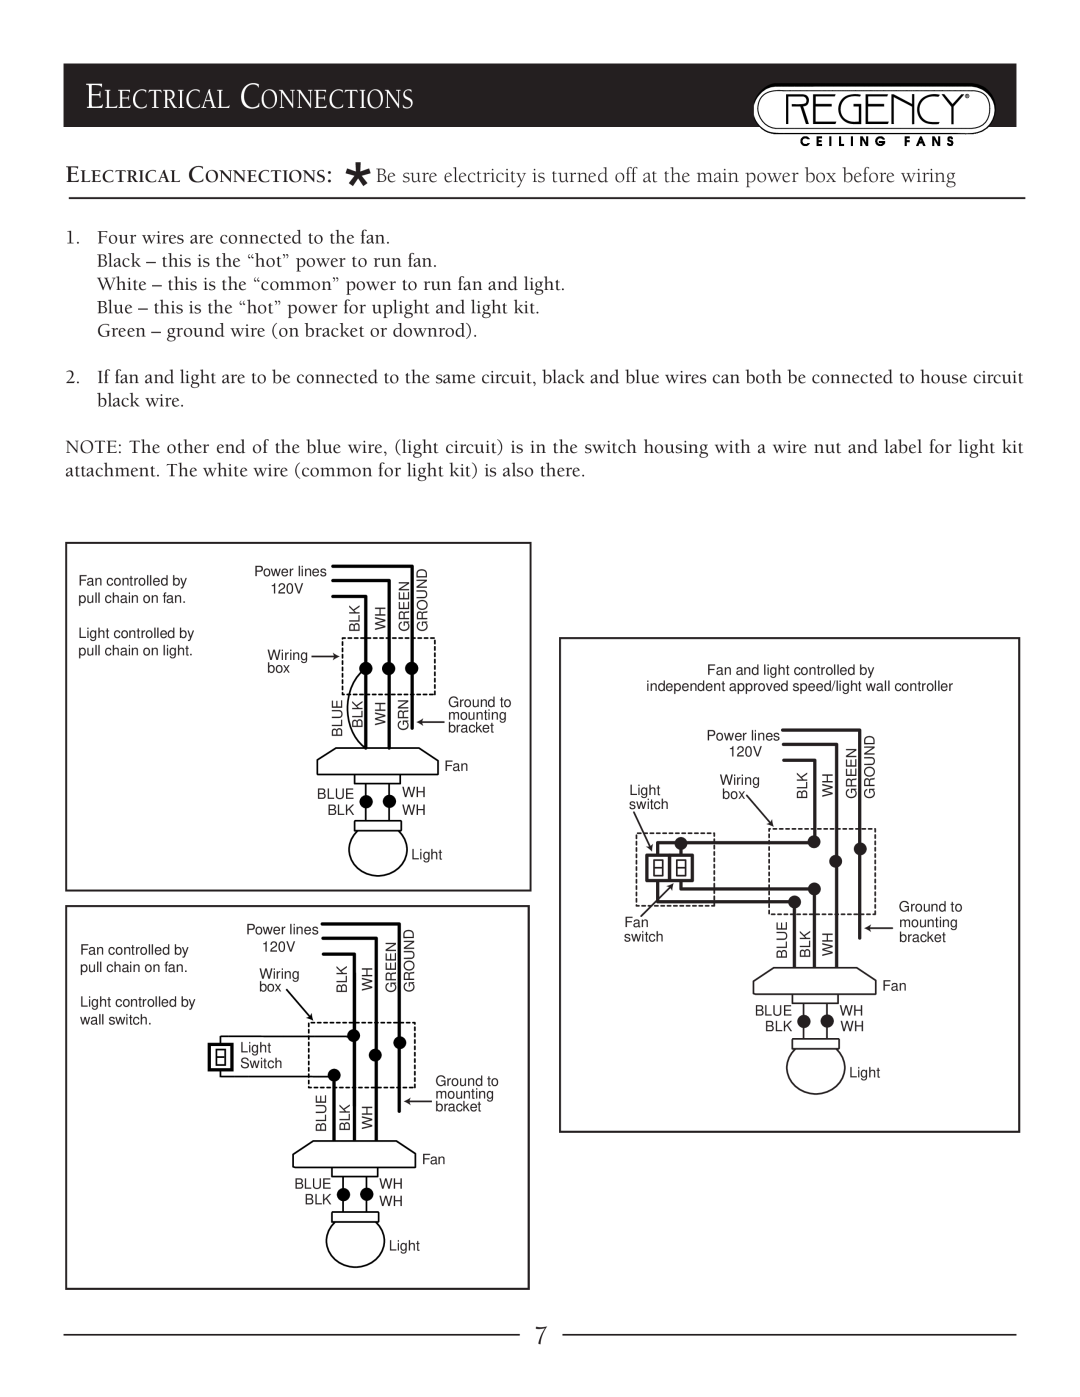 Regency Regatta owner manual Electrical Connections 